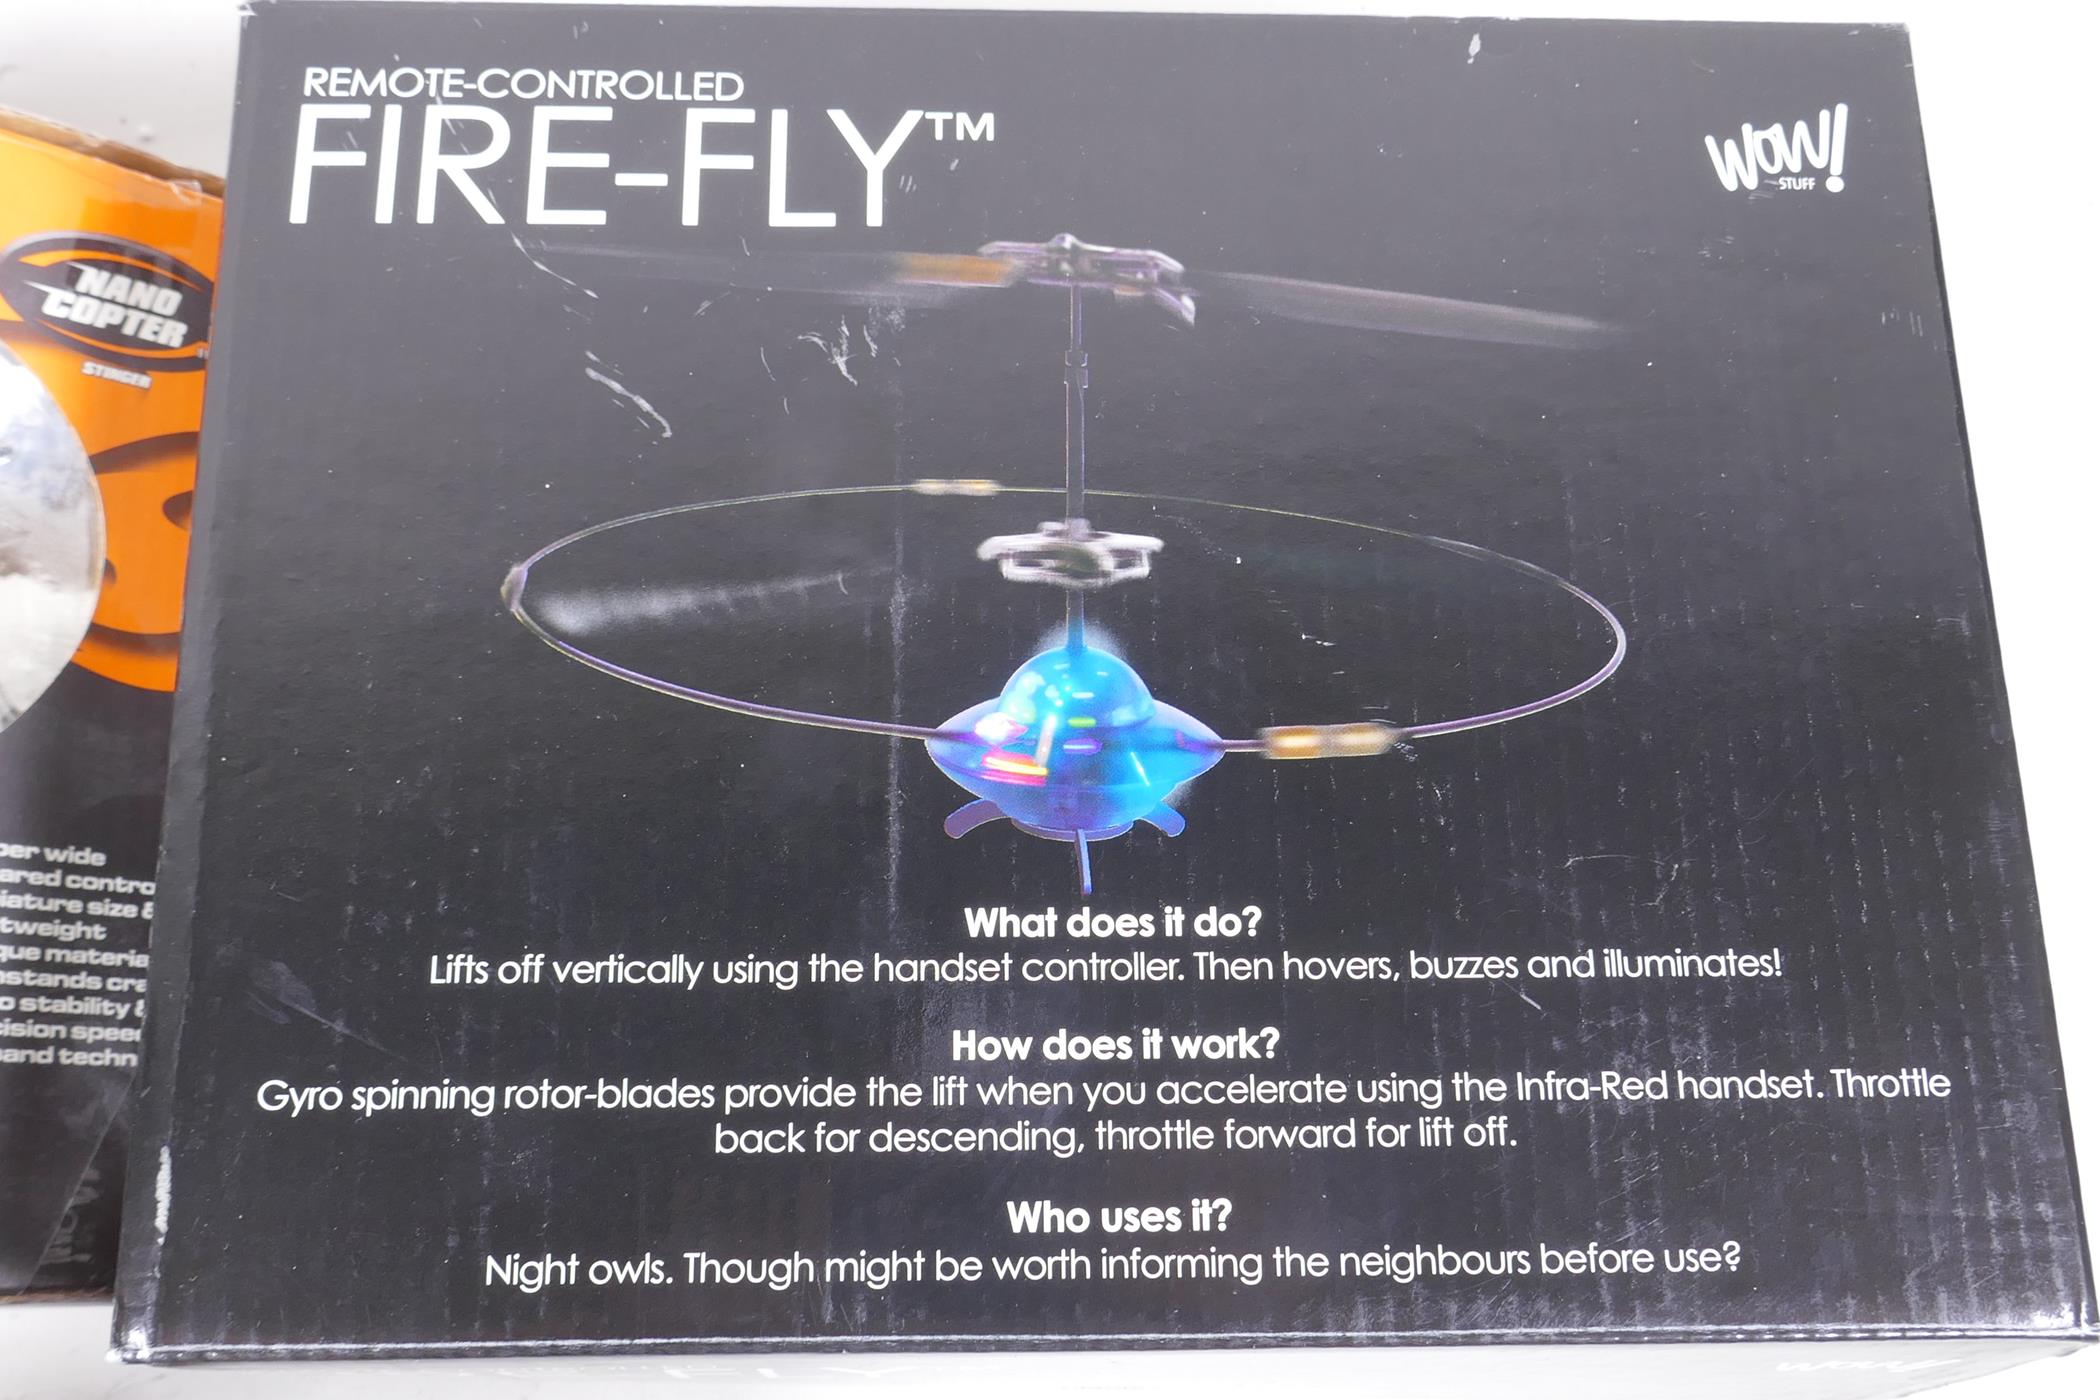 A remote control helicopter, The Nano Copter, in original box, the remote controlled Firefly in - Image 3 of 5